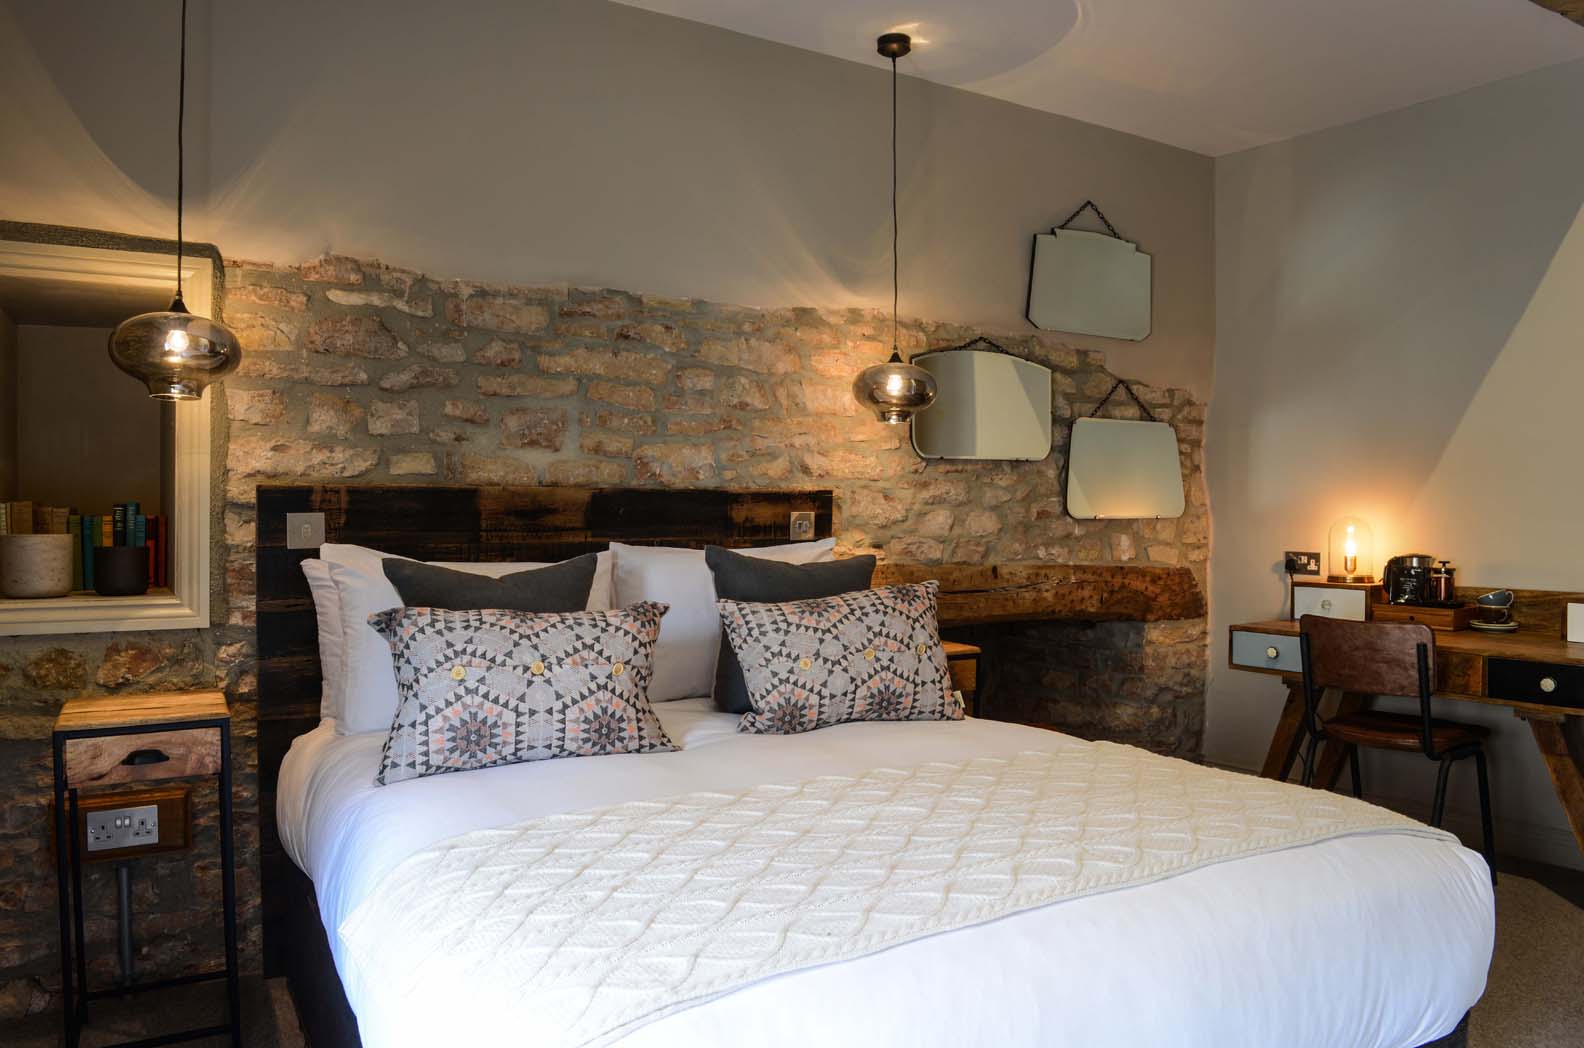 Greendown - Kingsize bedroom with white linen, stone wall feature, lamps and ambient lighting